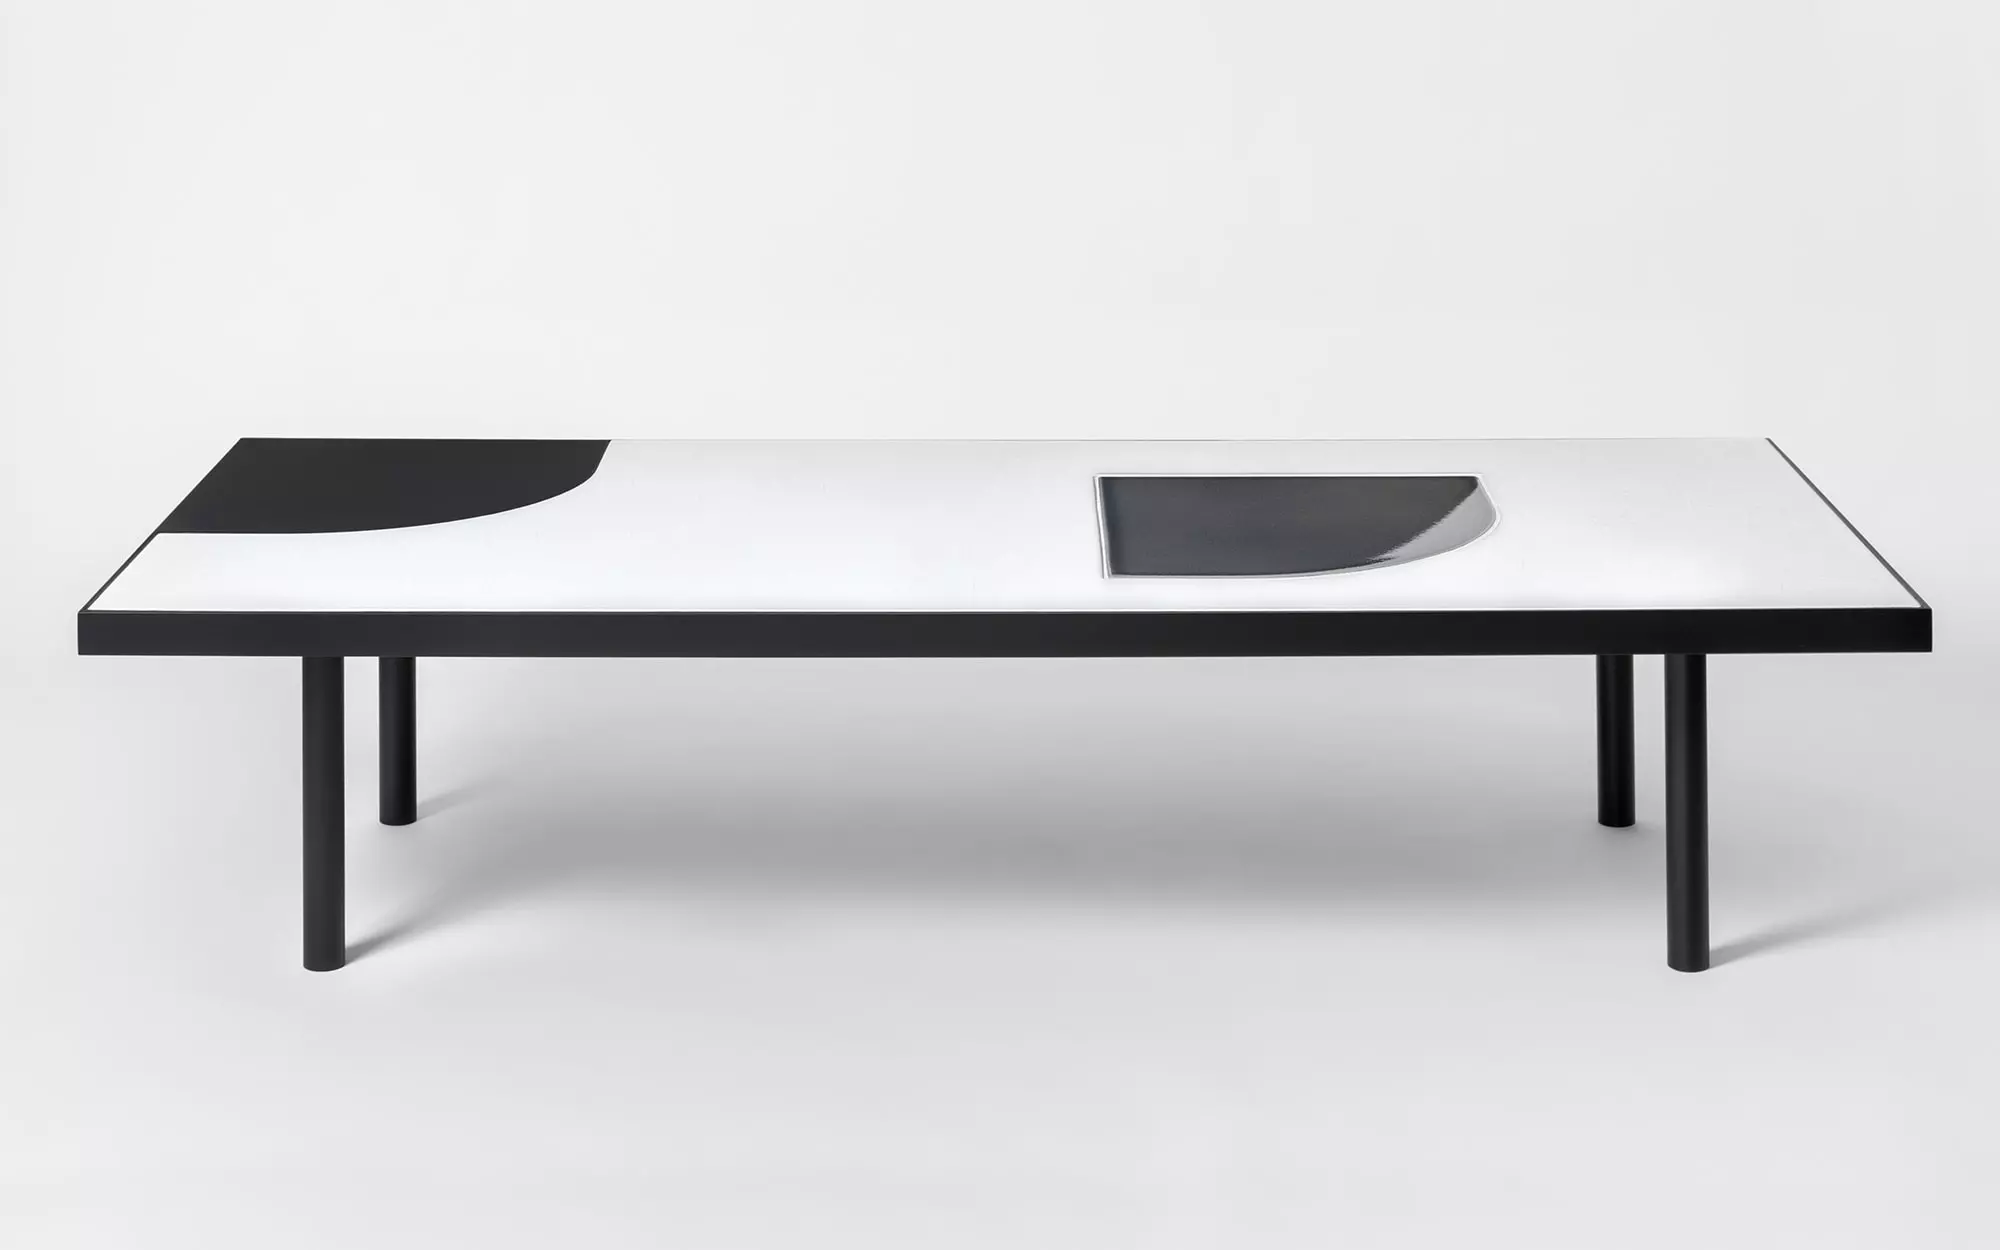 Translation Quadro Coffee Table - Pierre Charpin - @home new chapter.